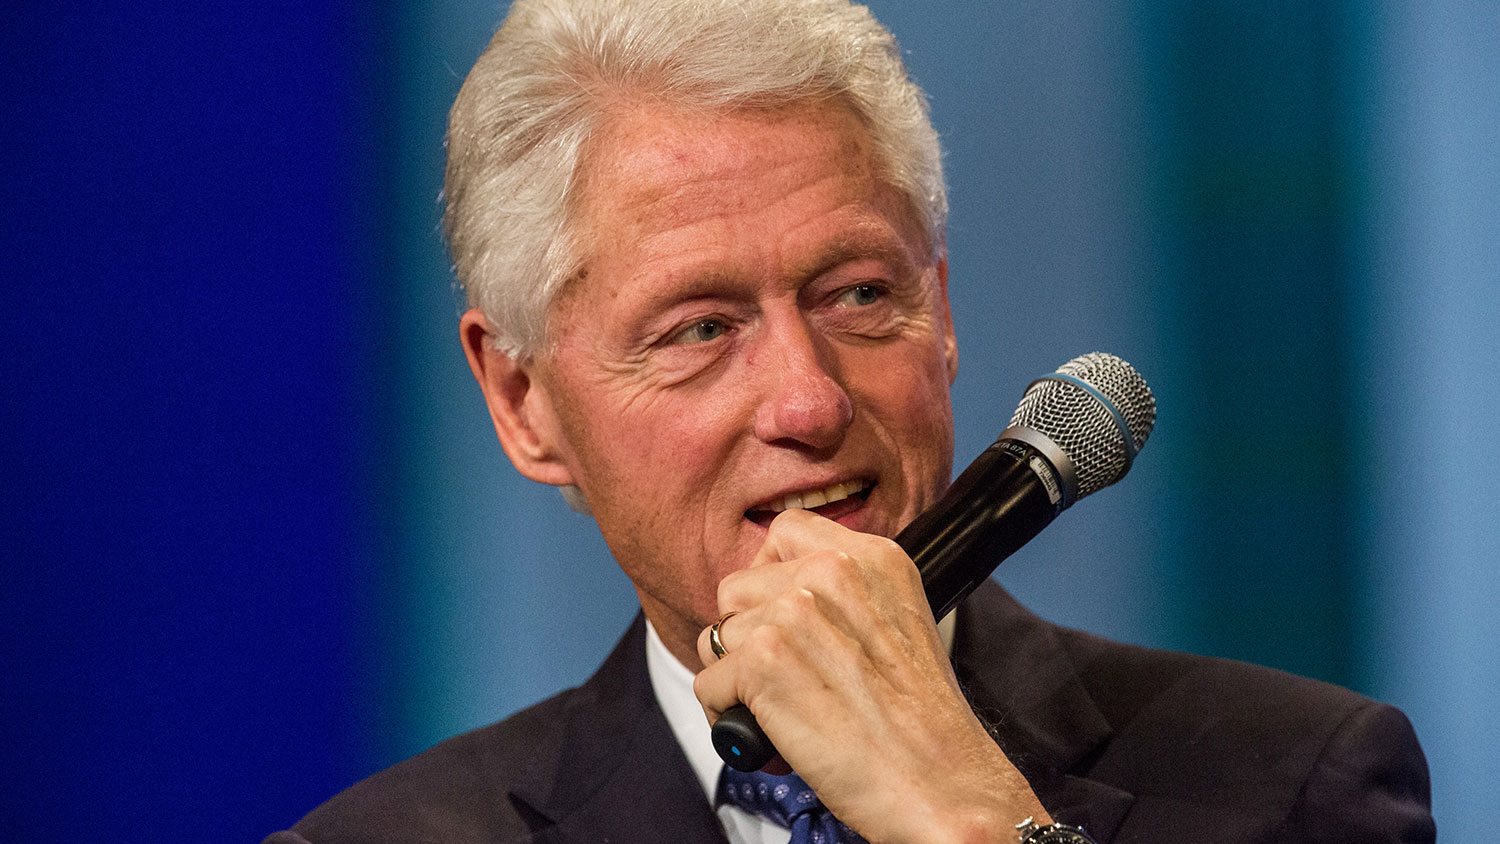 Former President Bill Clinton speaks at the Clinton Global Initiative's closing session on Sept. 29, 2015, in New York City.
